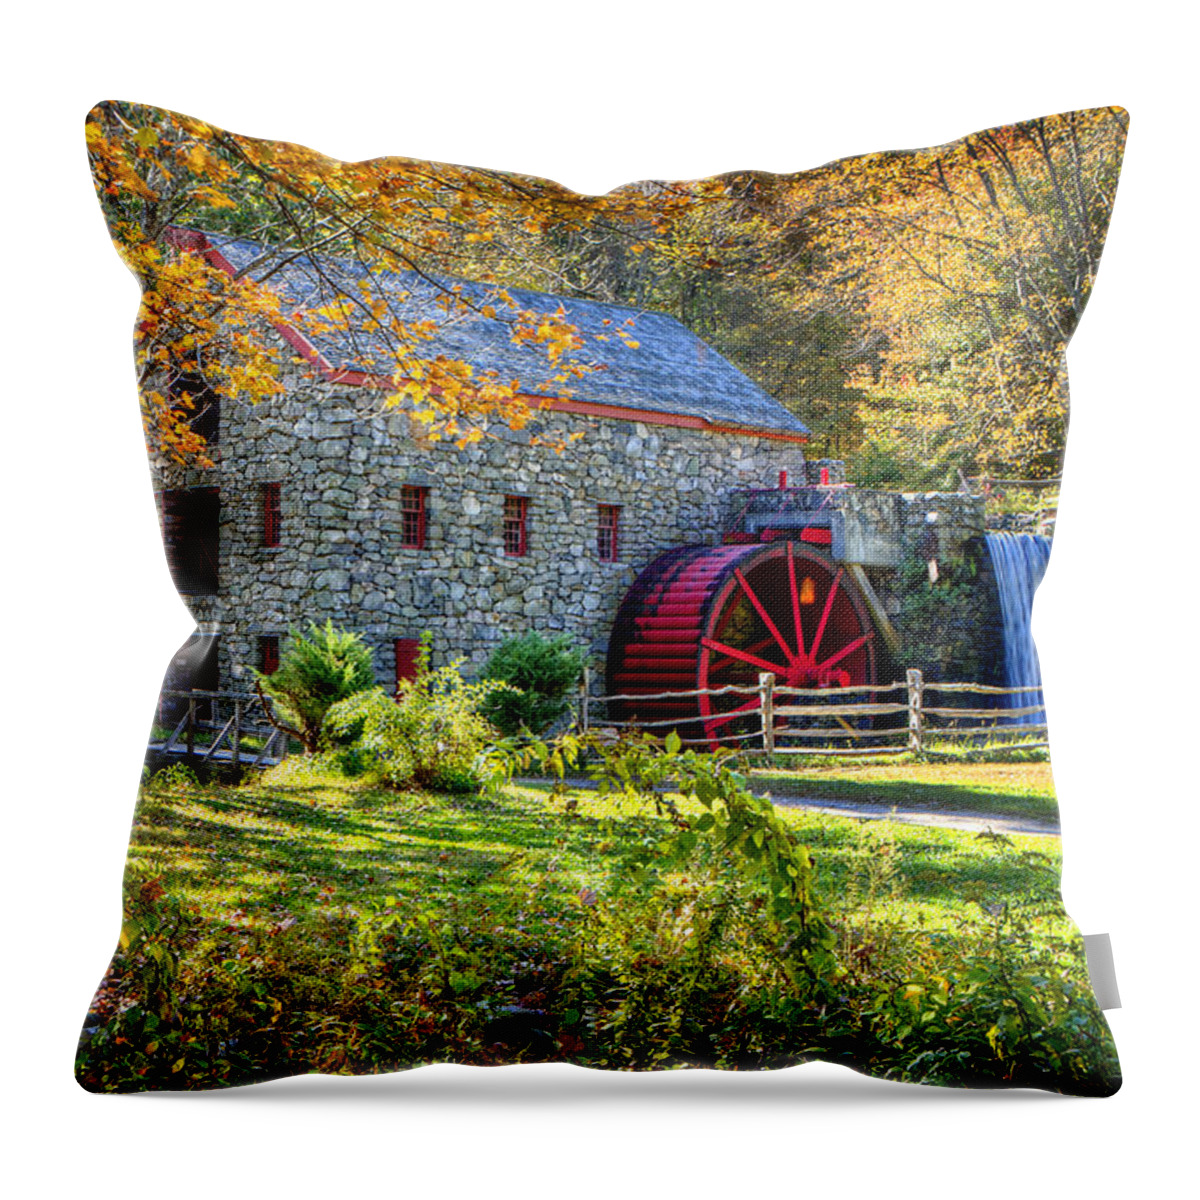 Autumn Throw Pillow featuring the photograph Wayside Inn Grist Mill by Donna Doherty